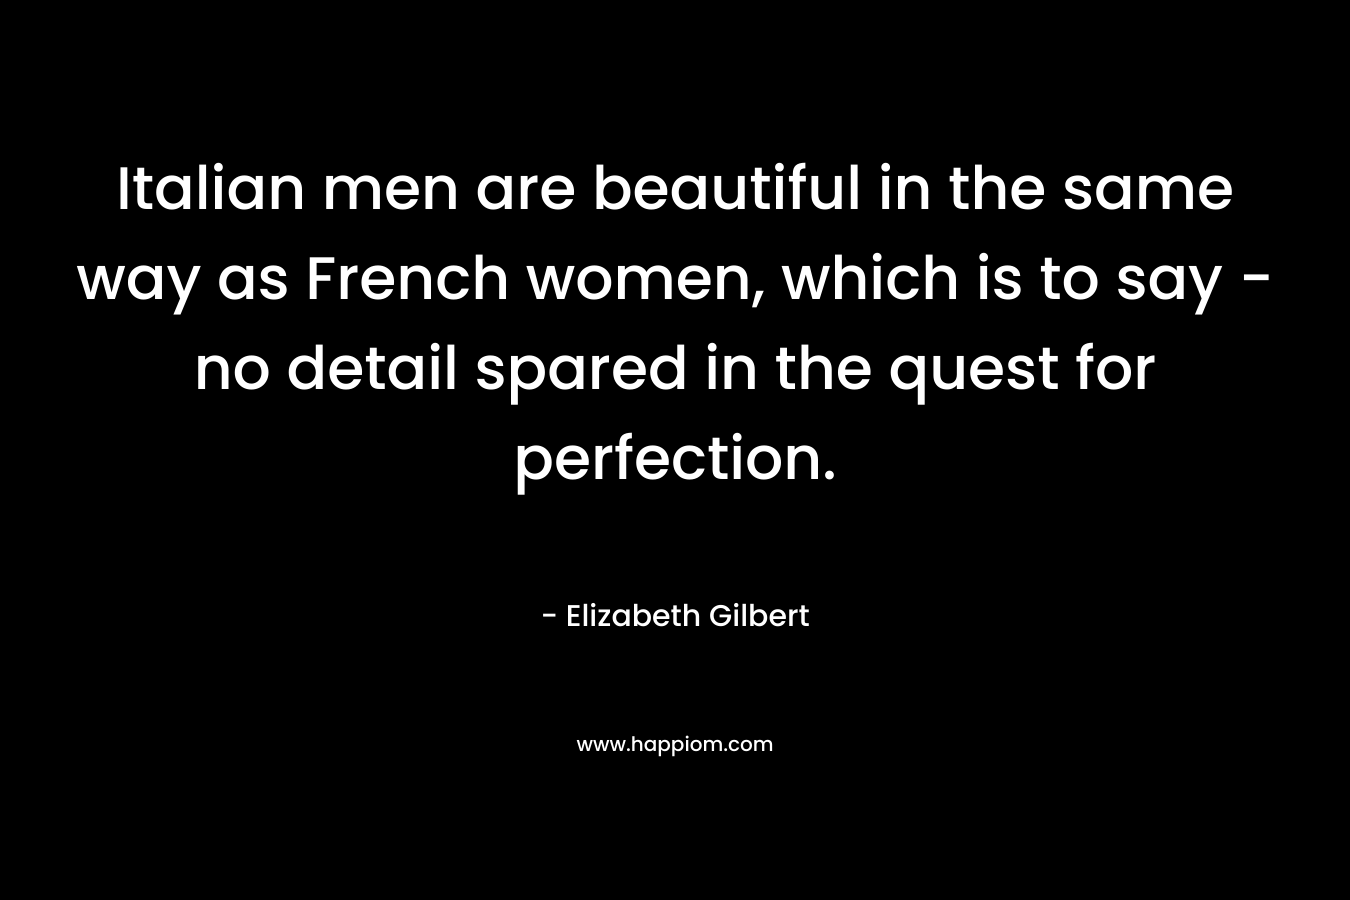 Italian men are beautiful in the same way as French women, which is to say – no detail spared in the quest for perfection. – Elizabeth Gilbert